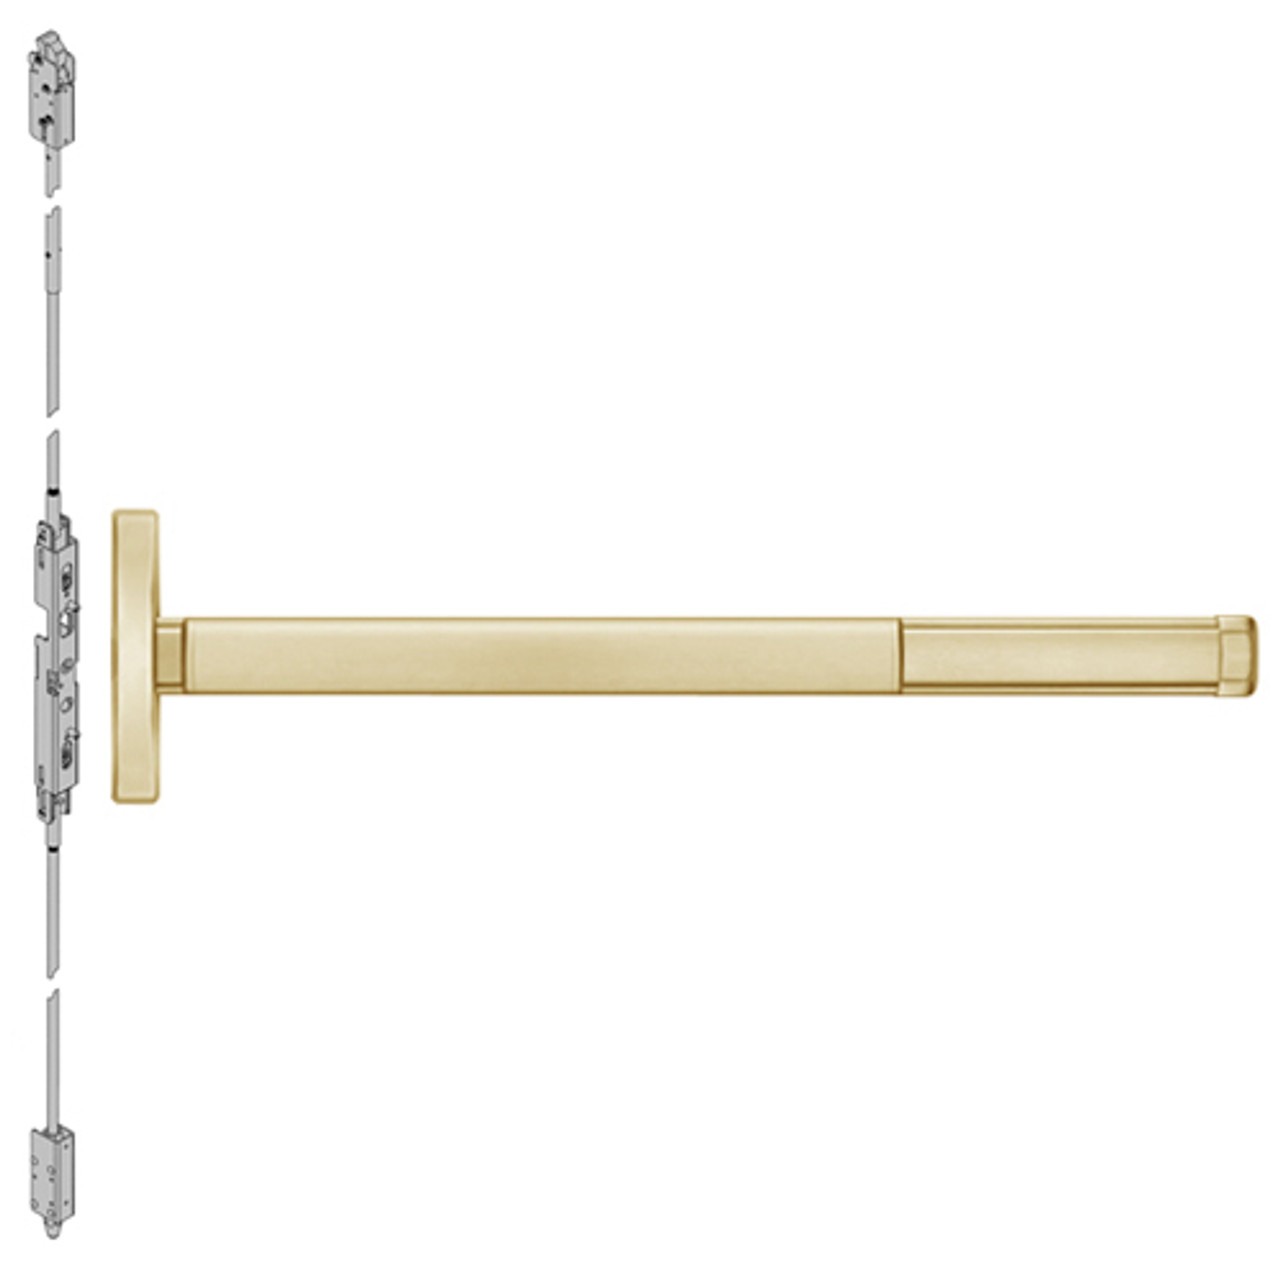 ELRFL2608-606-36 PHI 2600 Series Fire Rated Concealed Vertical Rod Exit Device with Electric Latch Retraction Prepped for Key Controls Lever in Satin Brass Finish